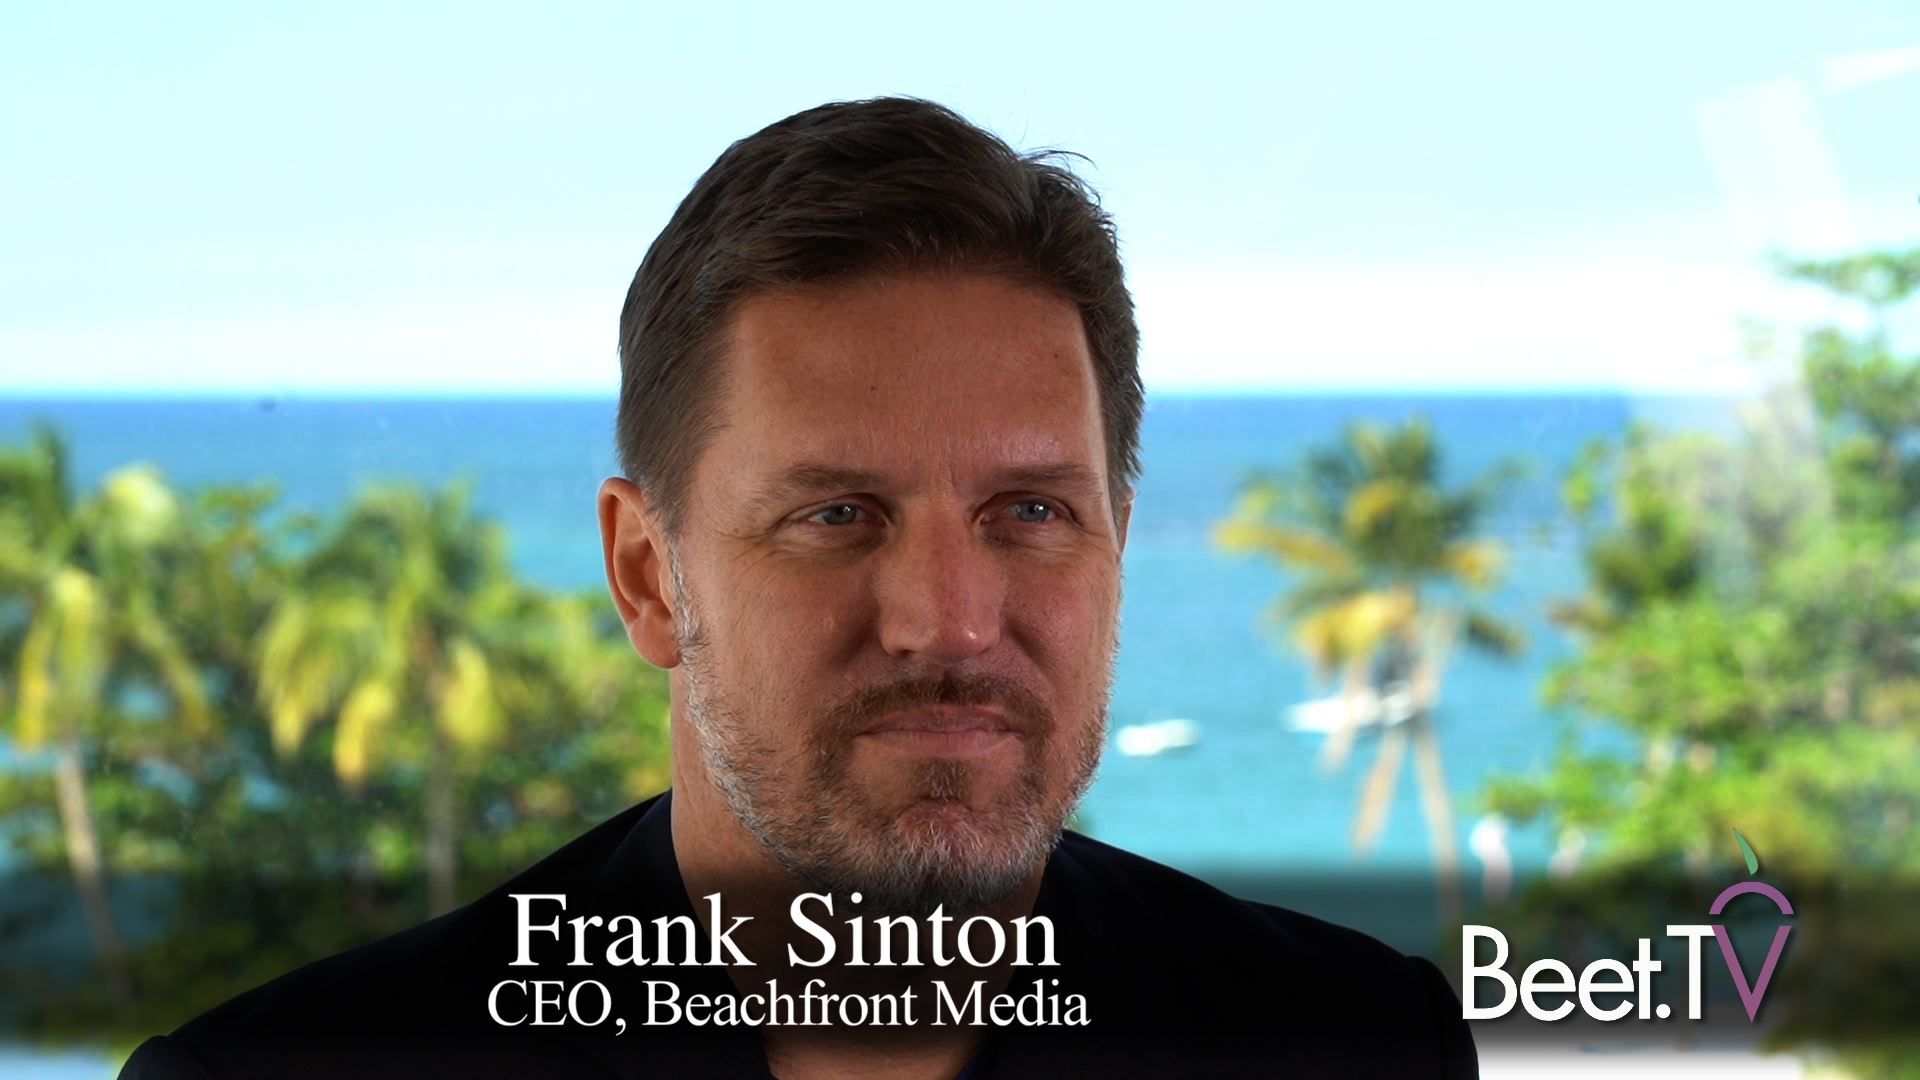 Beachfront Aims To Make Premium Video ‘As Real-Time As Possible’